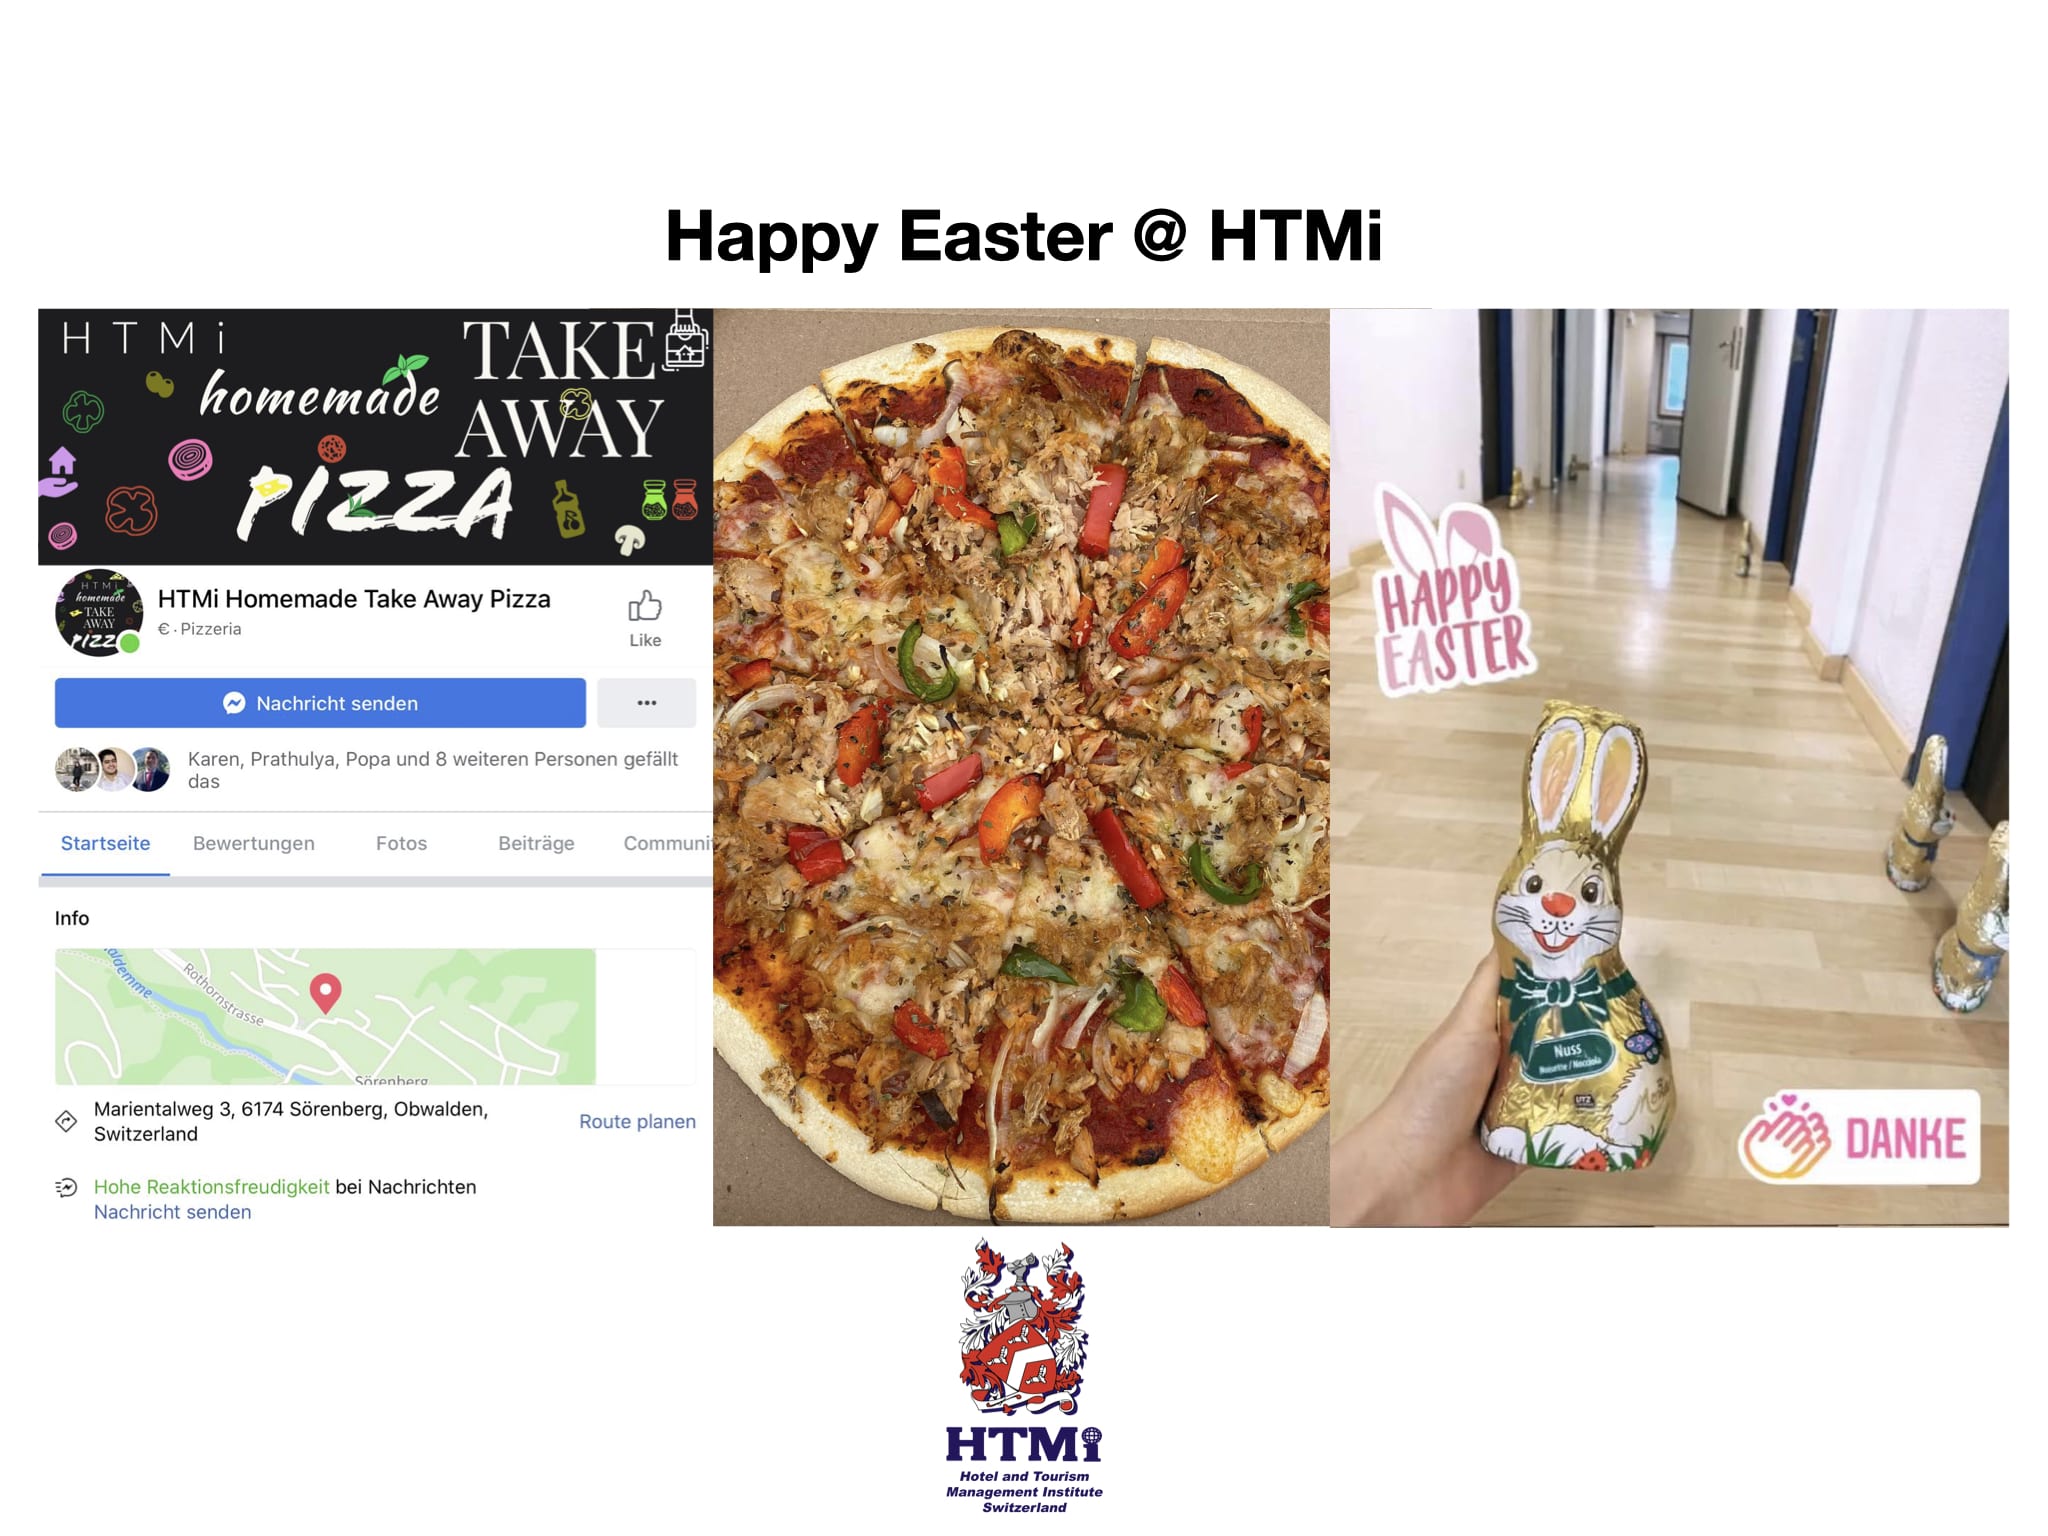 To support our students to enjoy Easter, and life at HTMi, our Student Services and Culinary Centres developed a takeaway pizza service for students on campus, and soon we will add French Fries and Kebabs to the menu. Ordering is simple on Facebook and by calling. On Easter Sunday our students woke up to a chocolate Easter Bunny waiting for them on their doorstep. We wish everyone a happy Easter from beautiful HTMi in the Swiss Alps Best wishes from HTMi for Easter